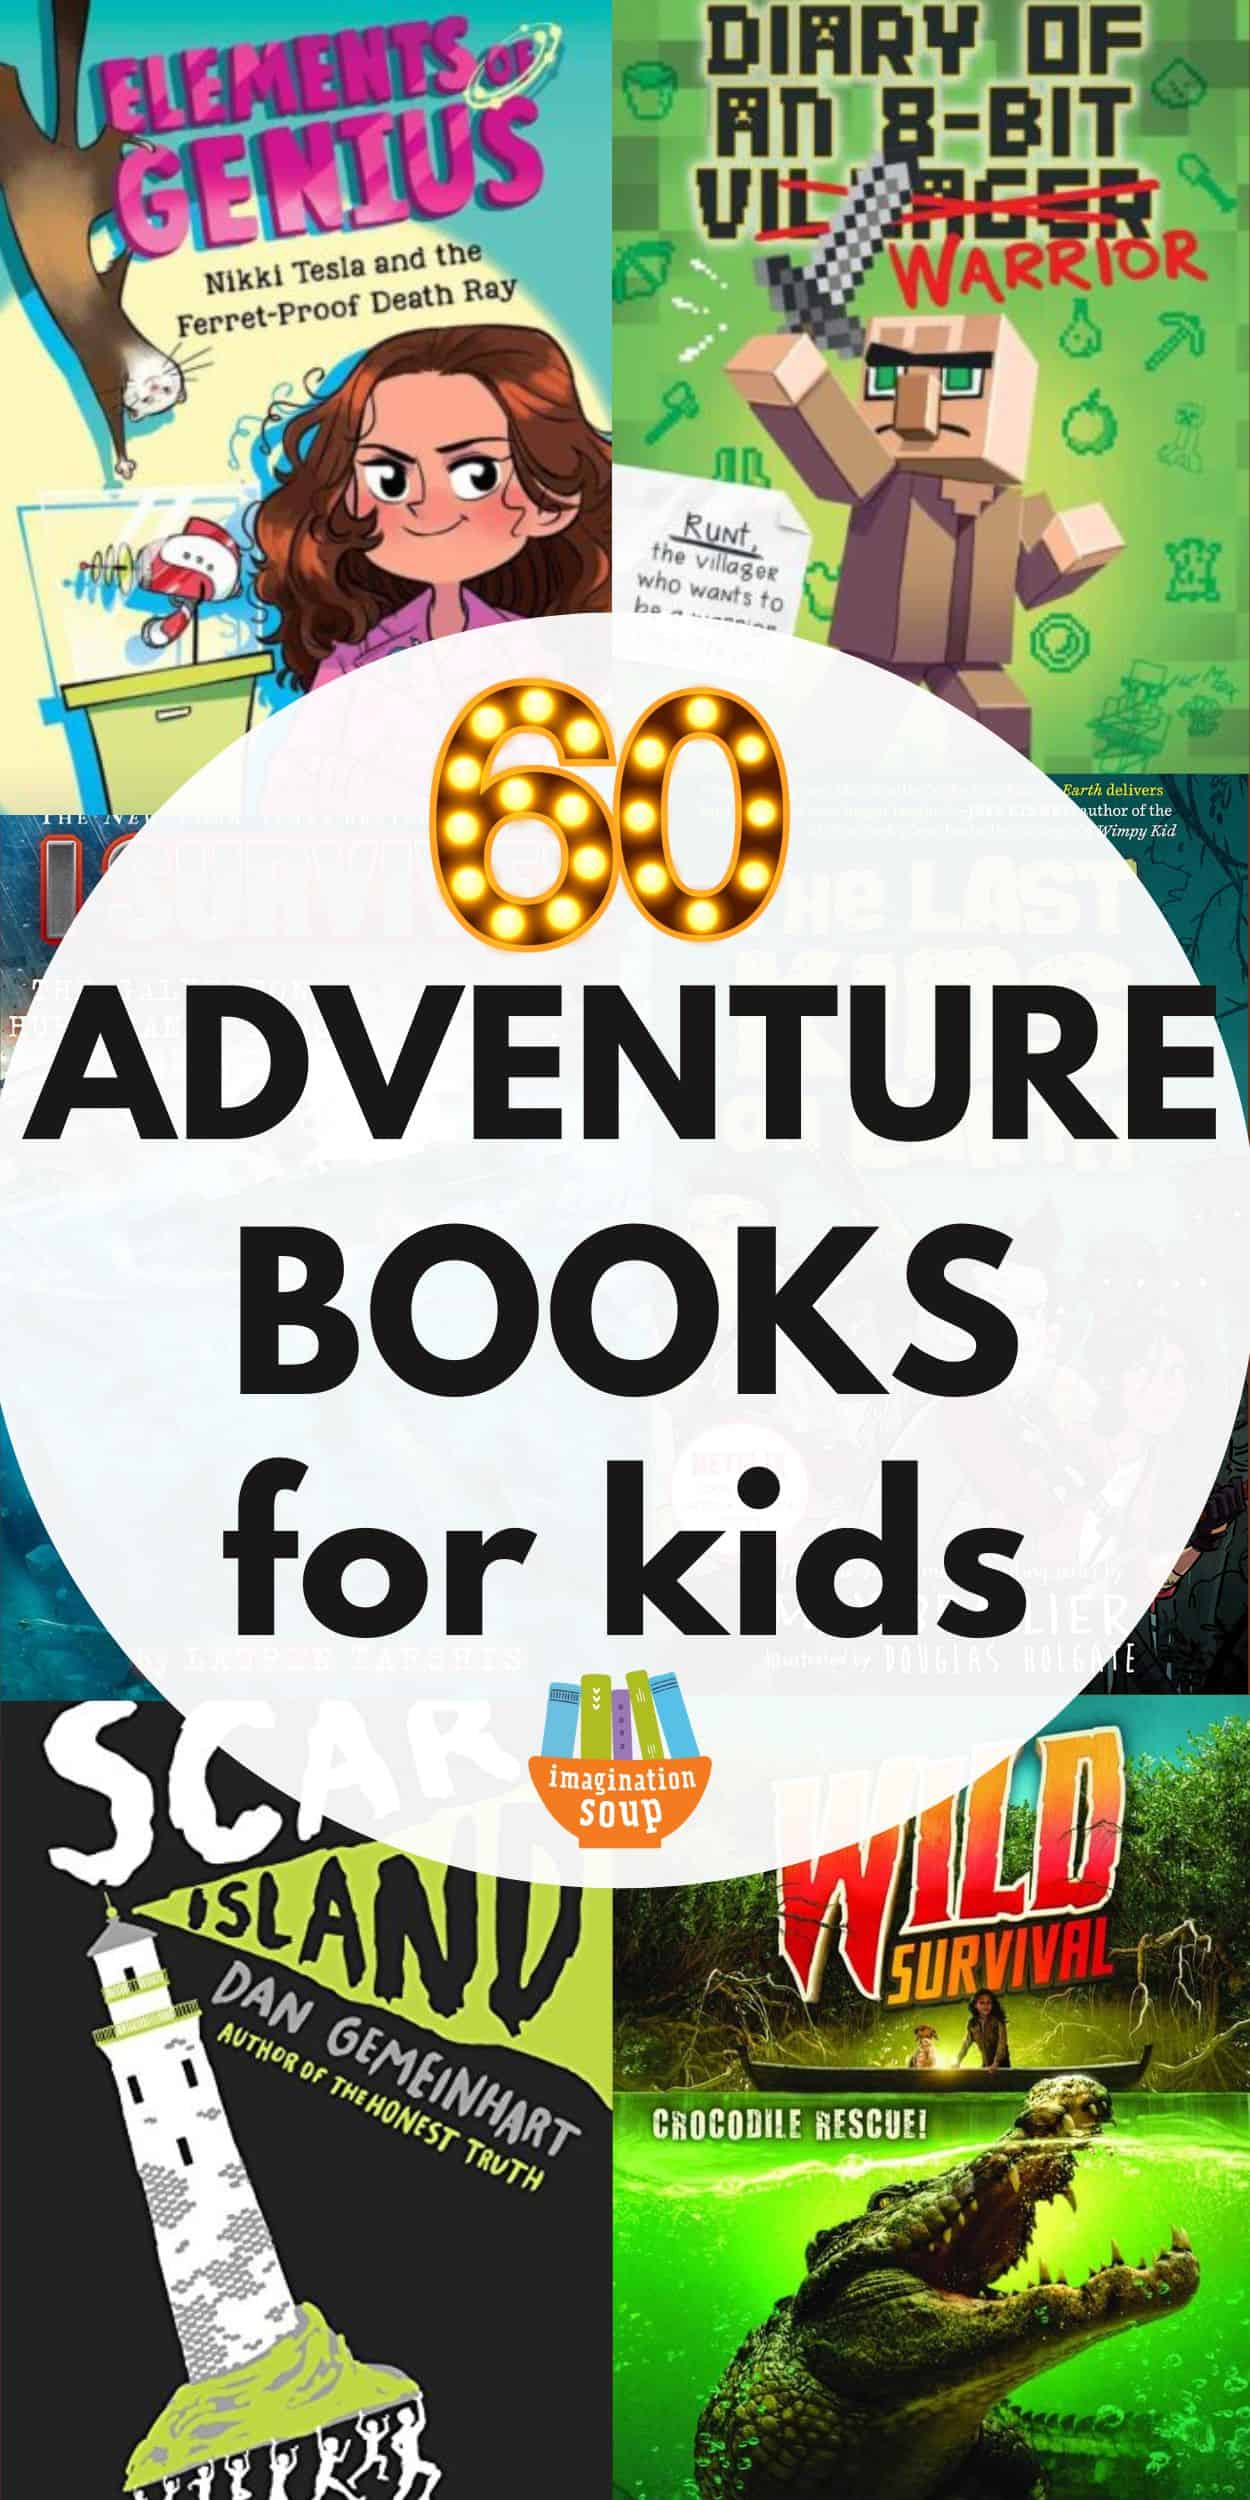 Get your children hooked on reading with an exciting adventure book! The adventure books on this list for kids contain non-stop action that zips along to keep readers entertained throughout, the plots range from curious to peculiar to even crazy. Talk about a recipe for lots of reading!